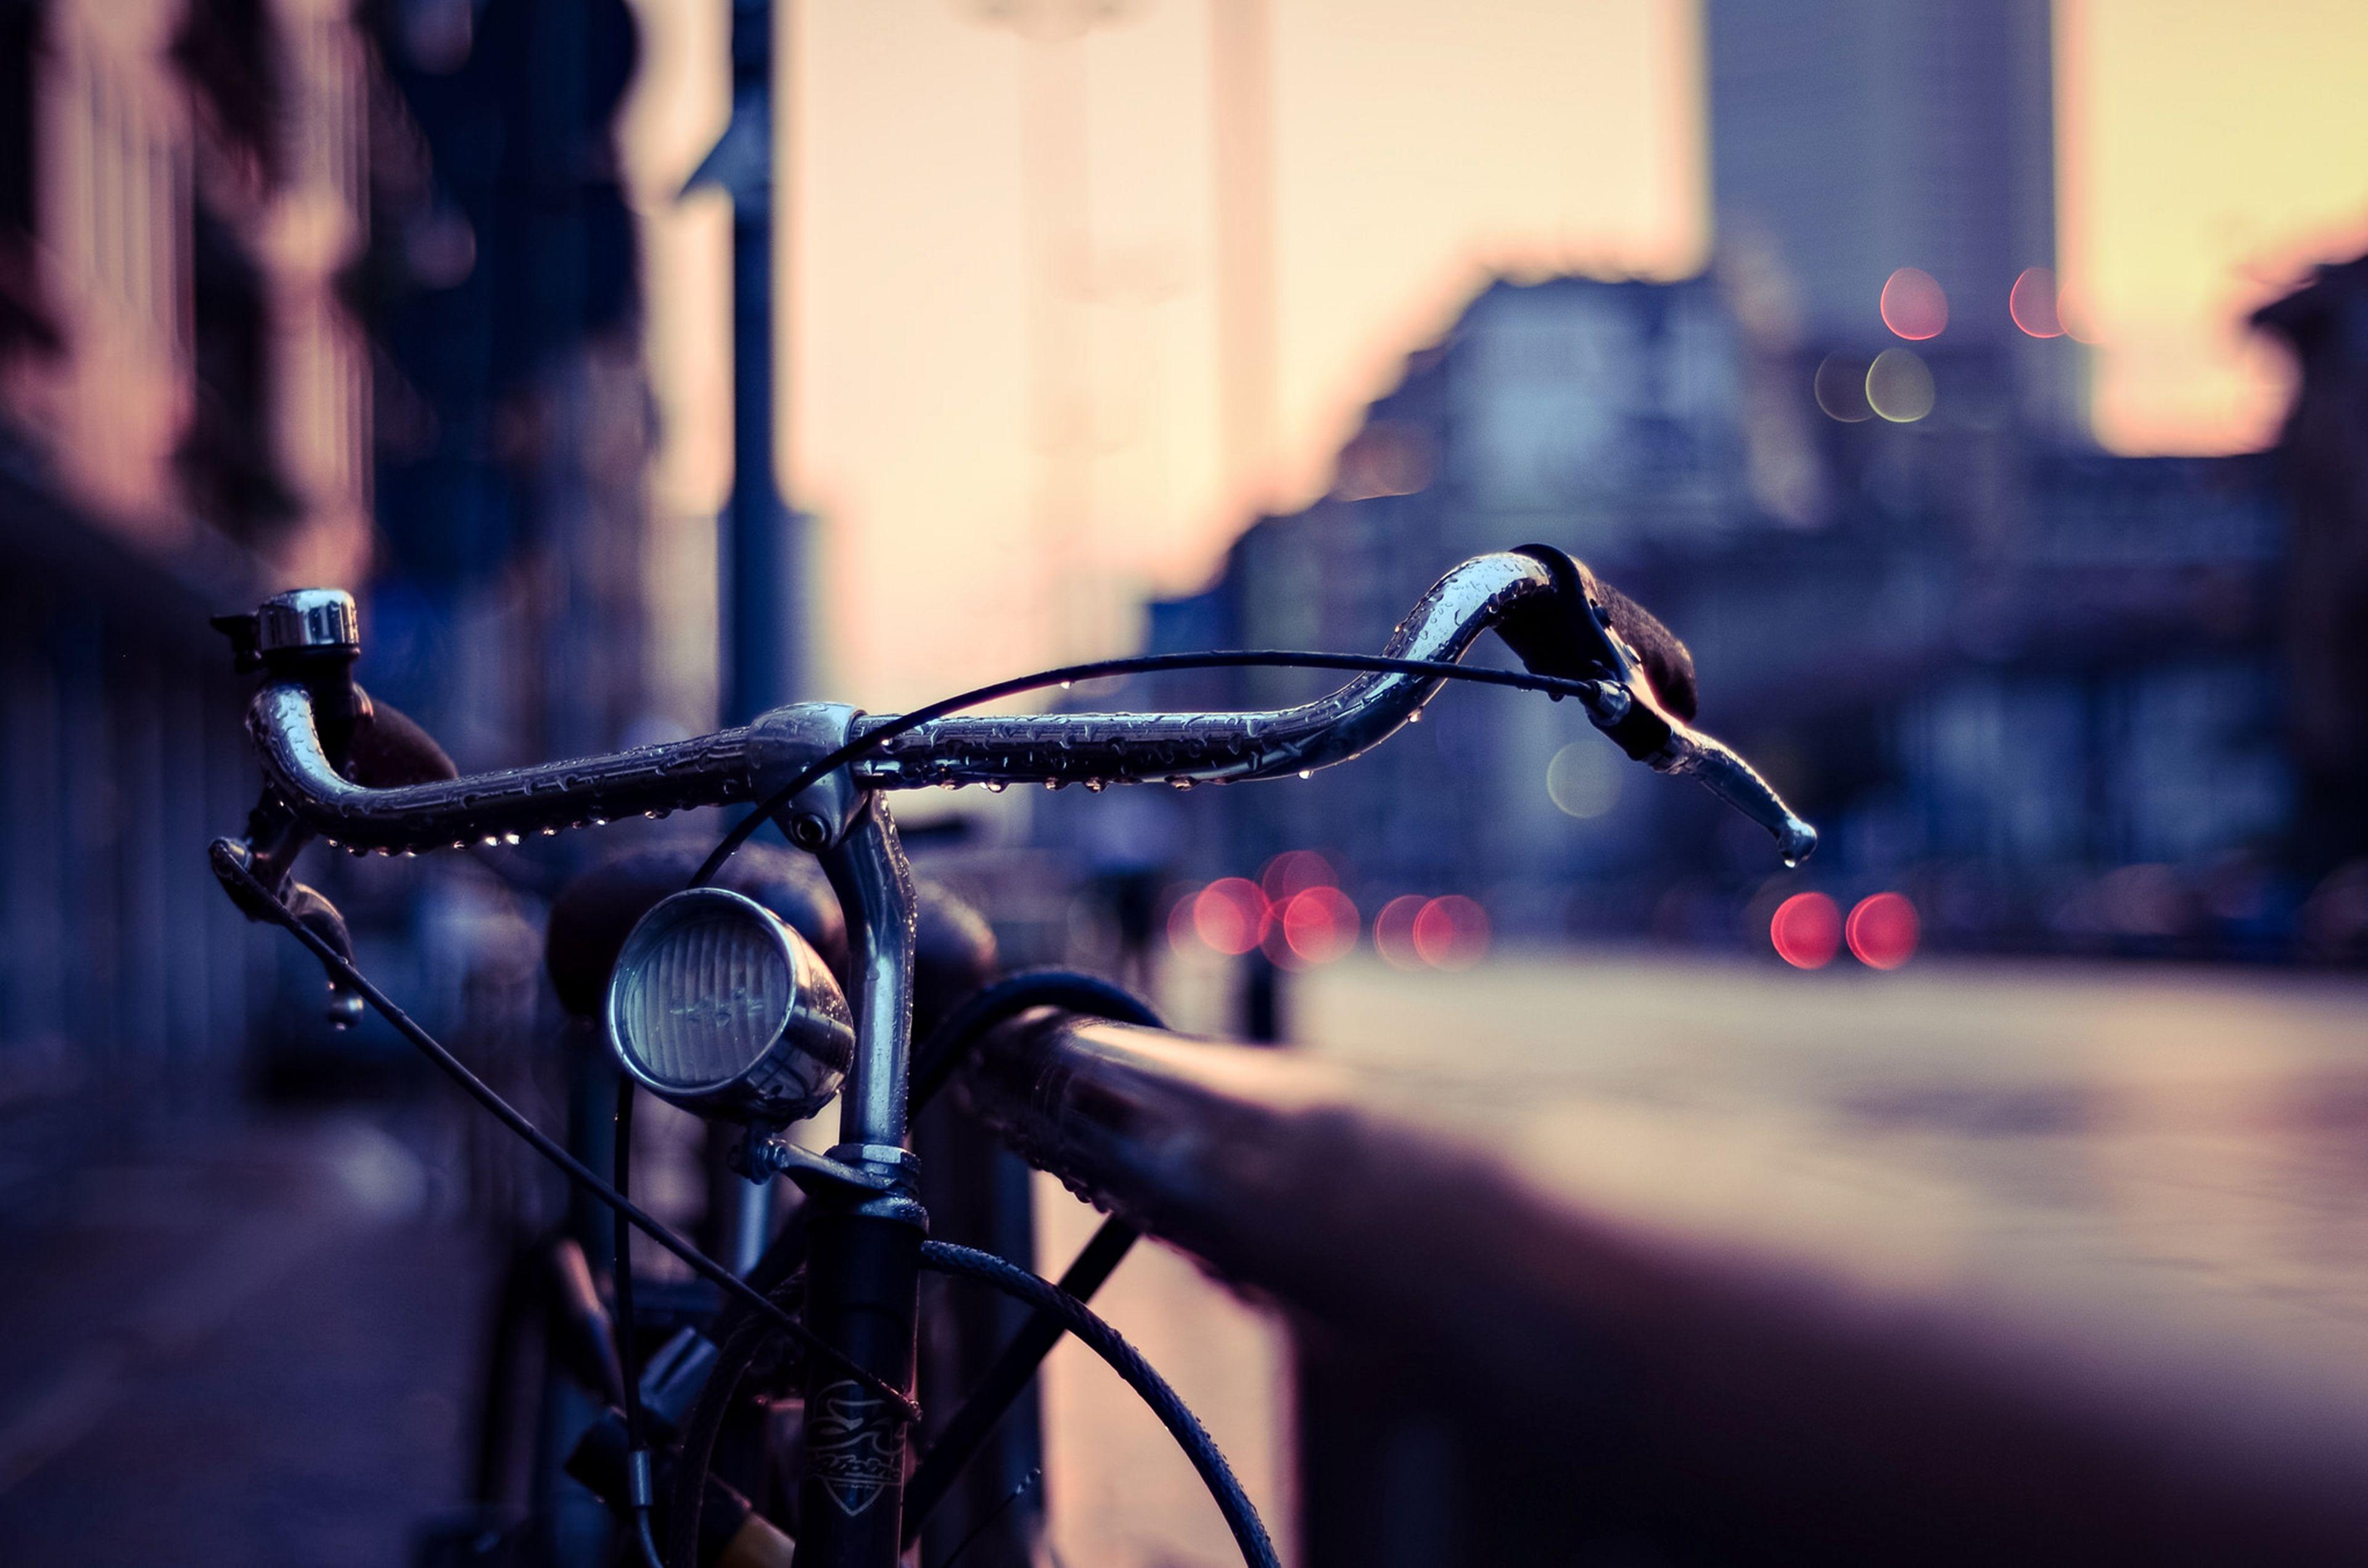 Bicycle HD Wallpaper and Background Image